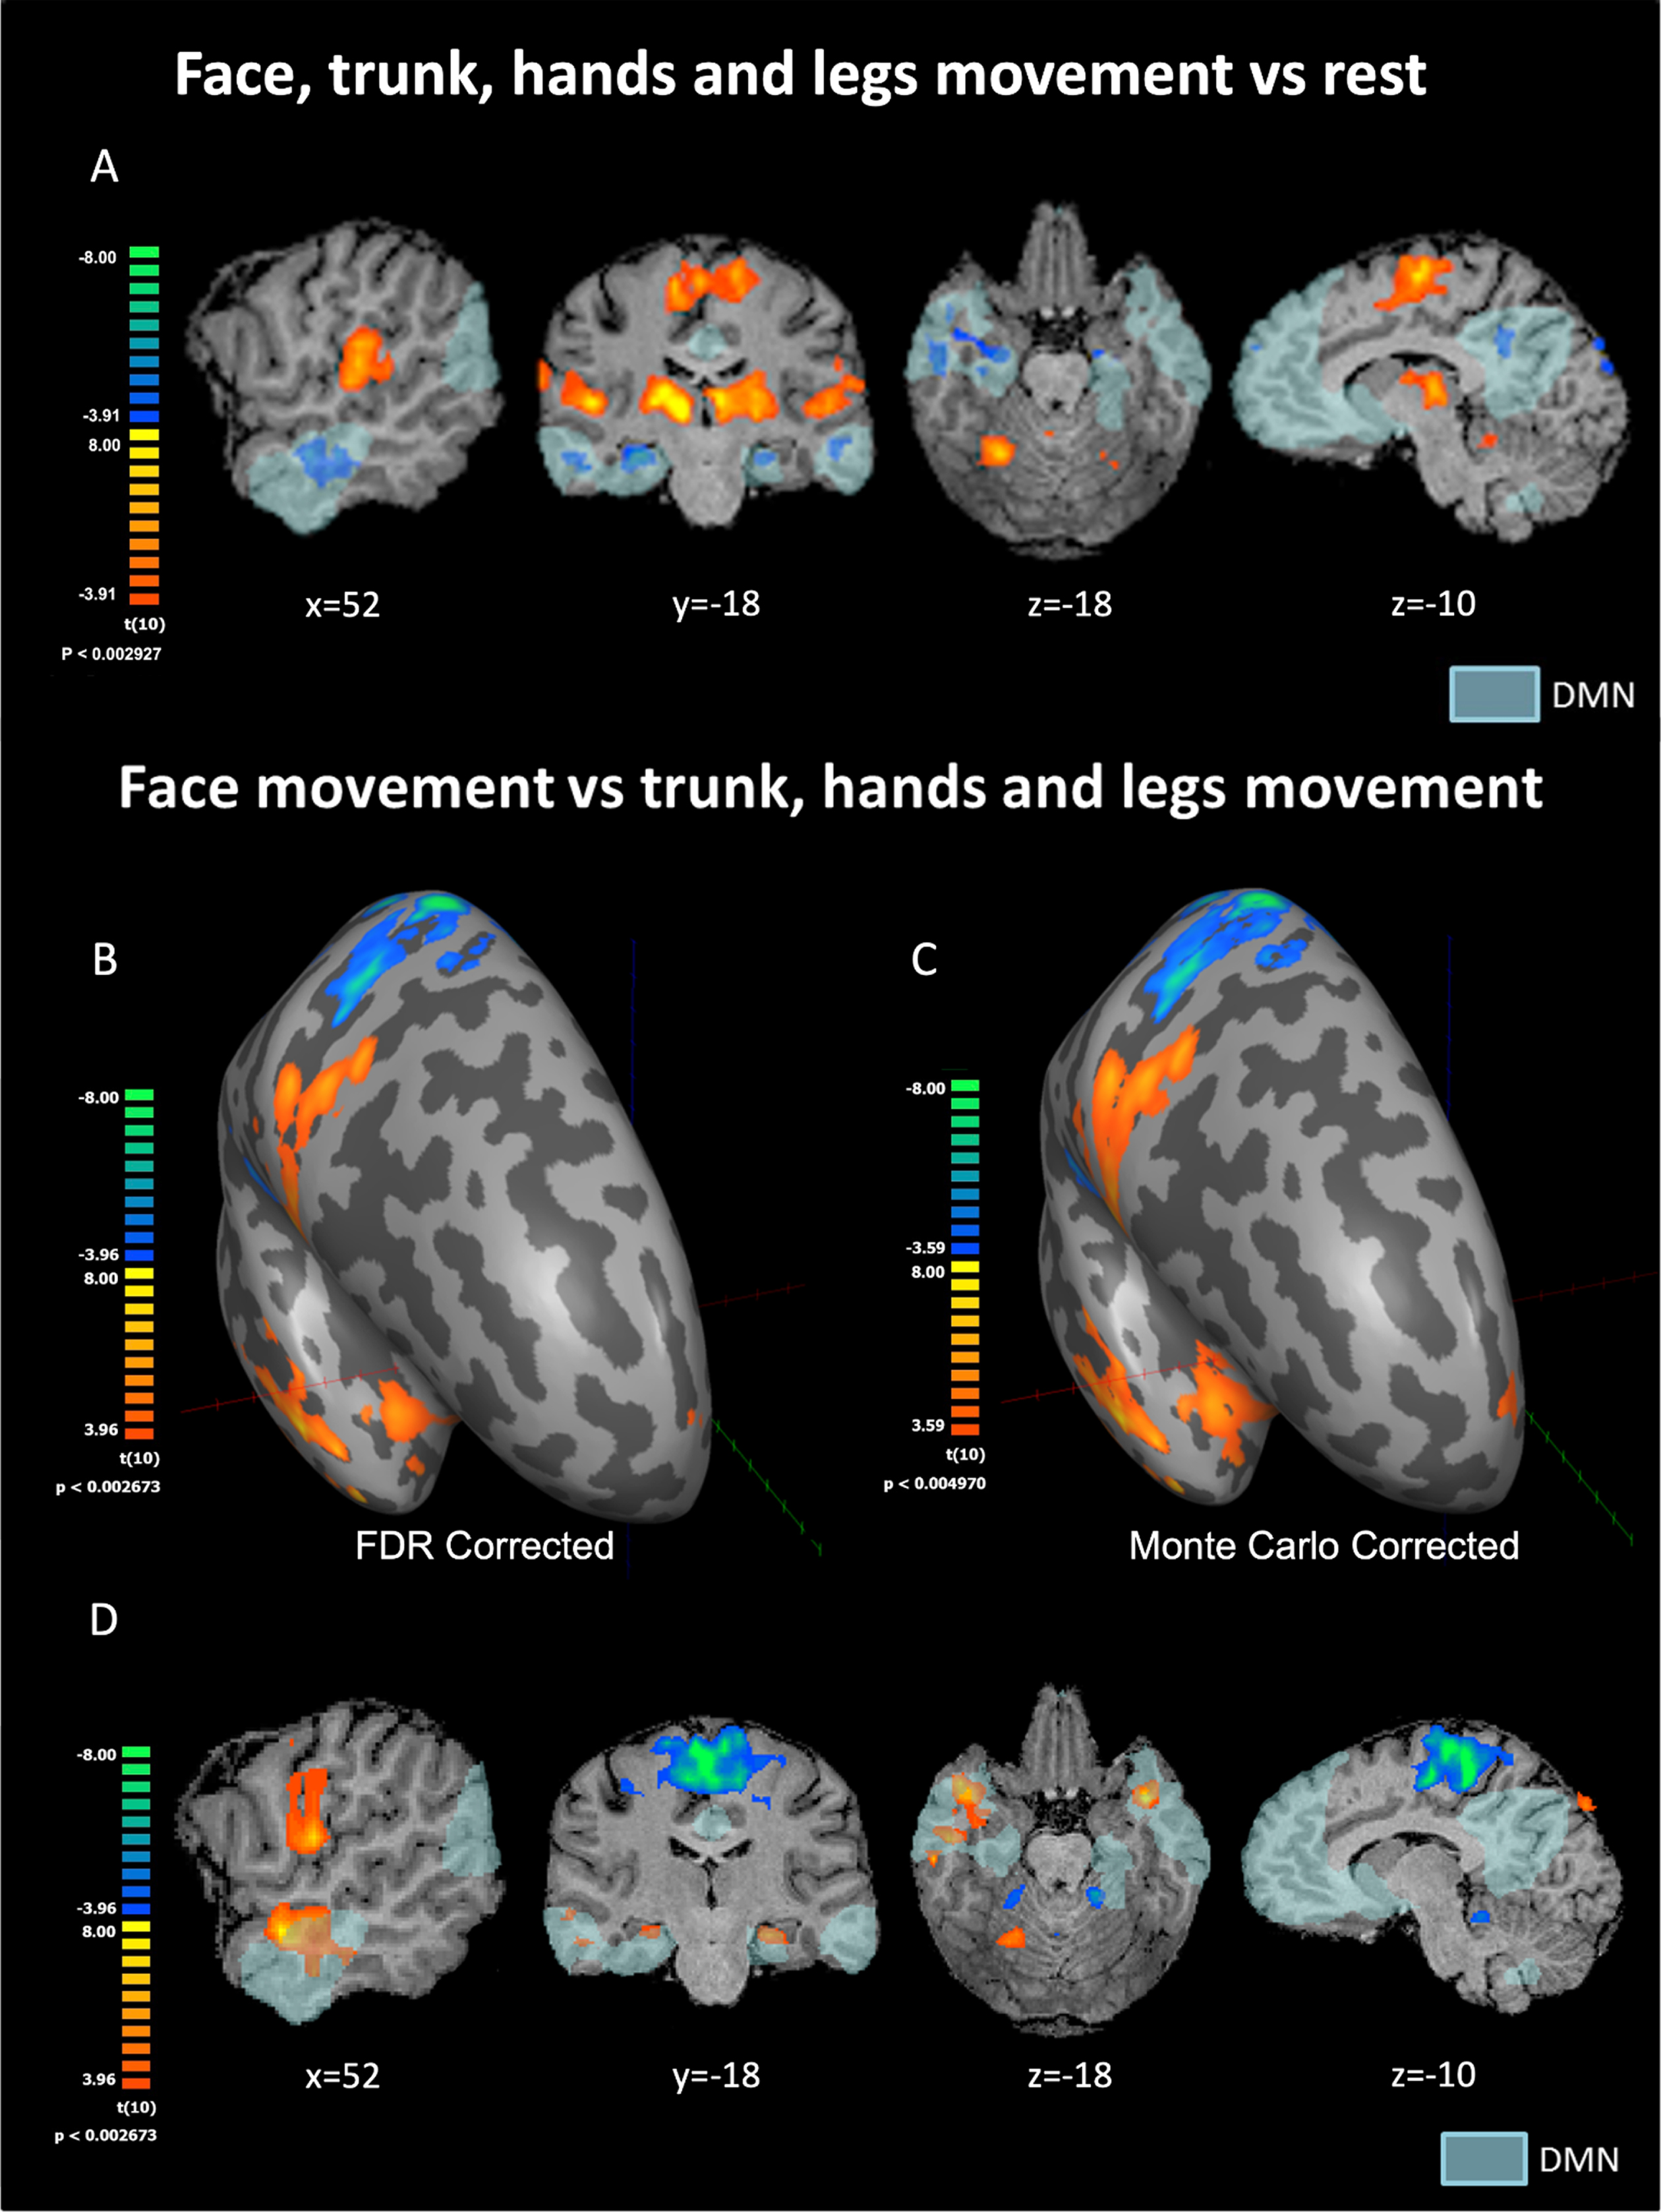 (A) Statistical parametric maps for movement of all body parts relative to rest condition following FDR correction. (B, C, D) Statistical parametric maps for face-movement relative to the movement of all other body parts. Results are presented on the inflated right hemisphere following FDR correction (B) and Monte Carlo correction (C), as well as on volume-based maps (D). The most intriguing activation pattern can be seen in B–D with strong face selectivity in the TP and Hip parts of the DMN. TP = temporal pole, Hip = hippocampus, PCC = posterior cingulate cortex, M1 = primary motor cortex, DMN = default mode network. DMN in light blue as derived from resting-state functional connectivity analysis.